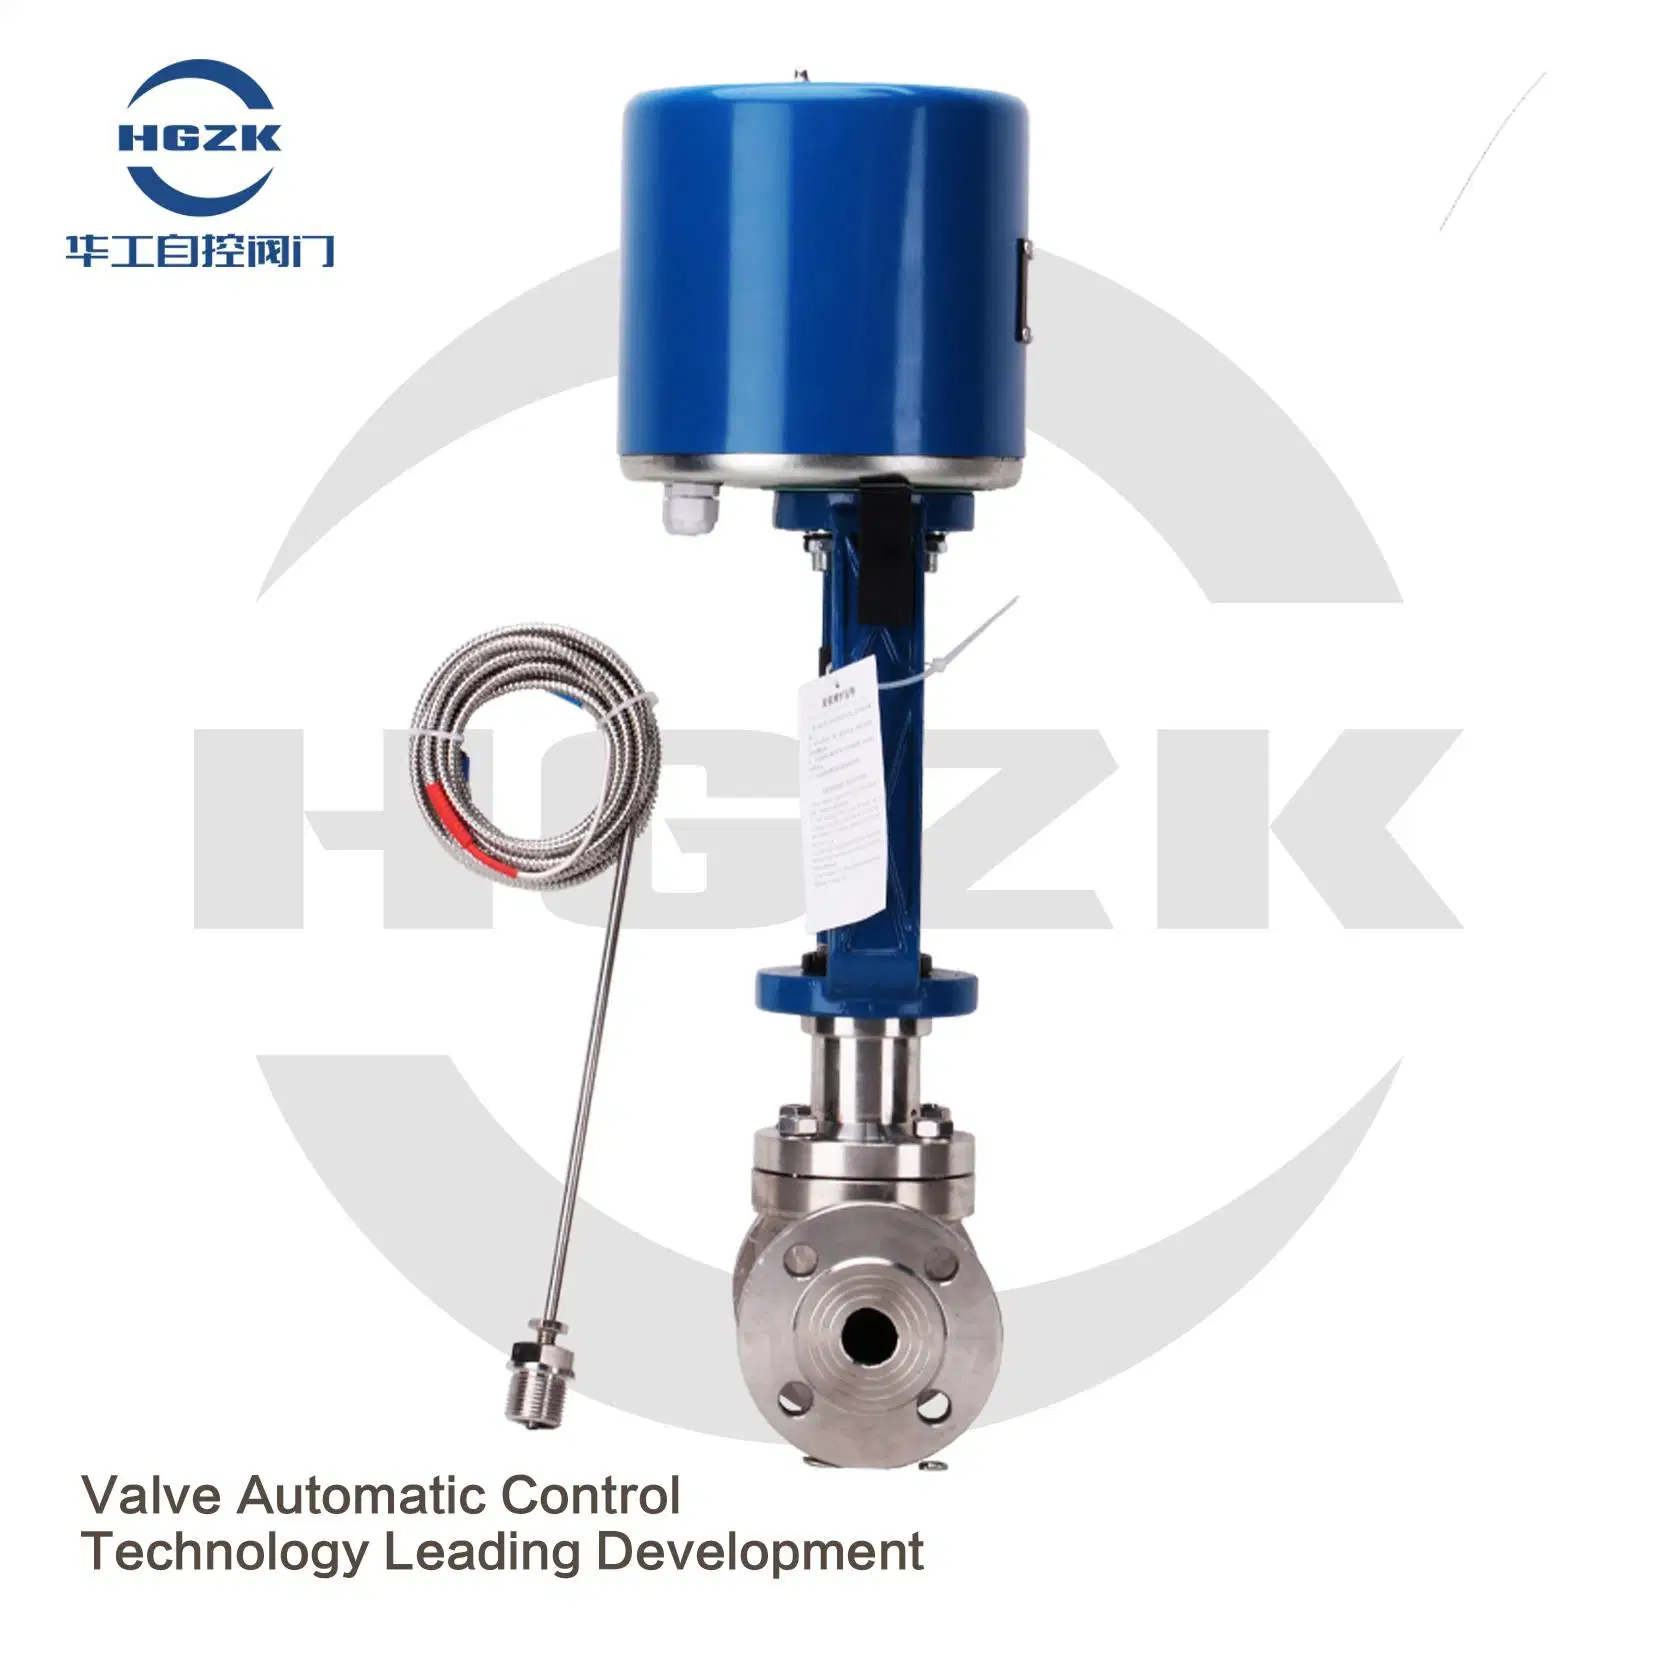 Stainless Steel Pneumatic Diaphragm Regulating Valve with Positioner